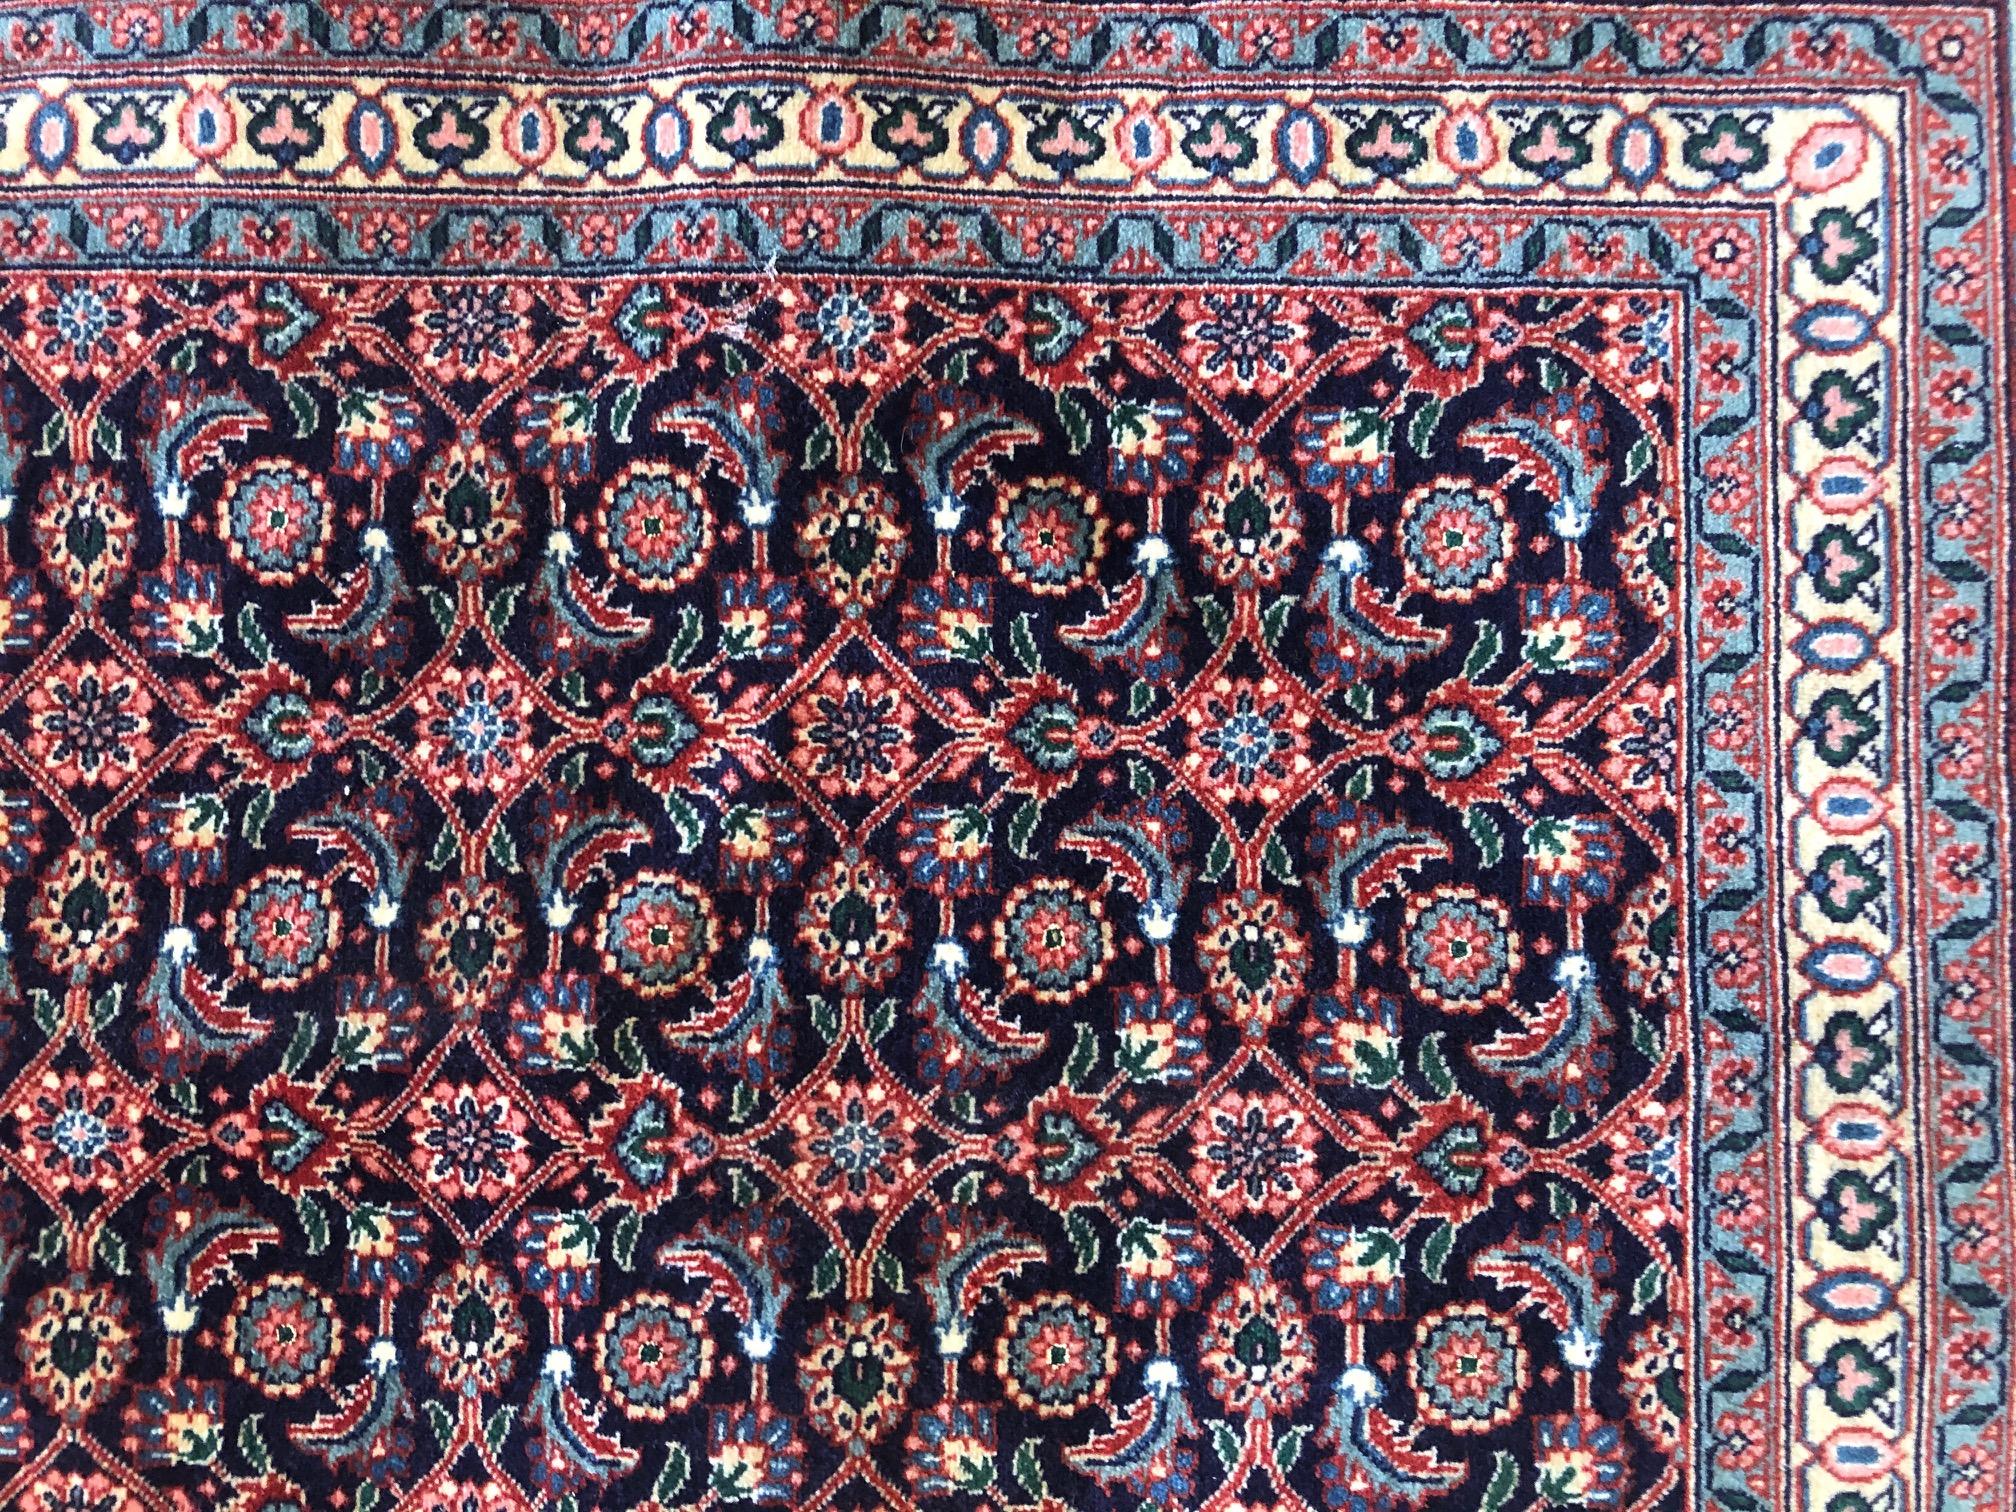 Contemporary Persian Hand Knotted All-Over Herati Red Tabriz Runner Rug